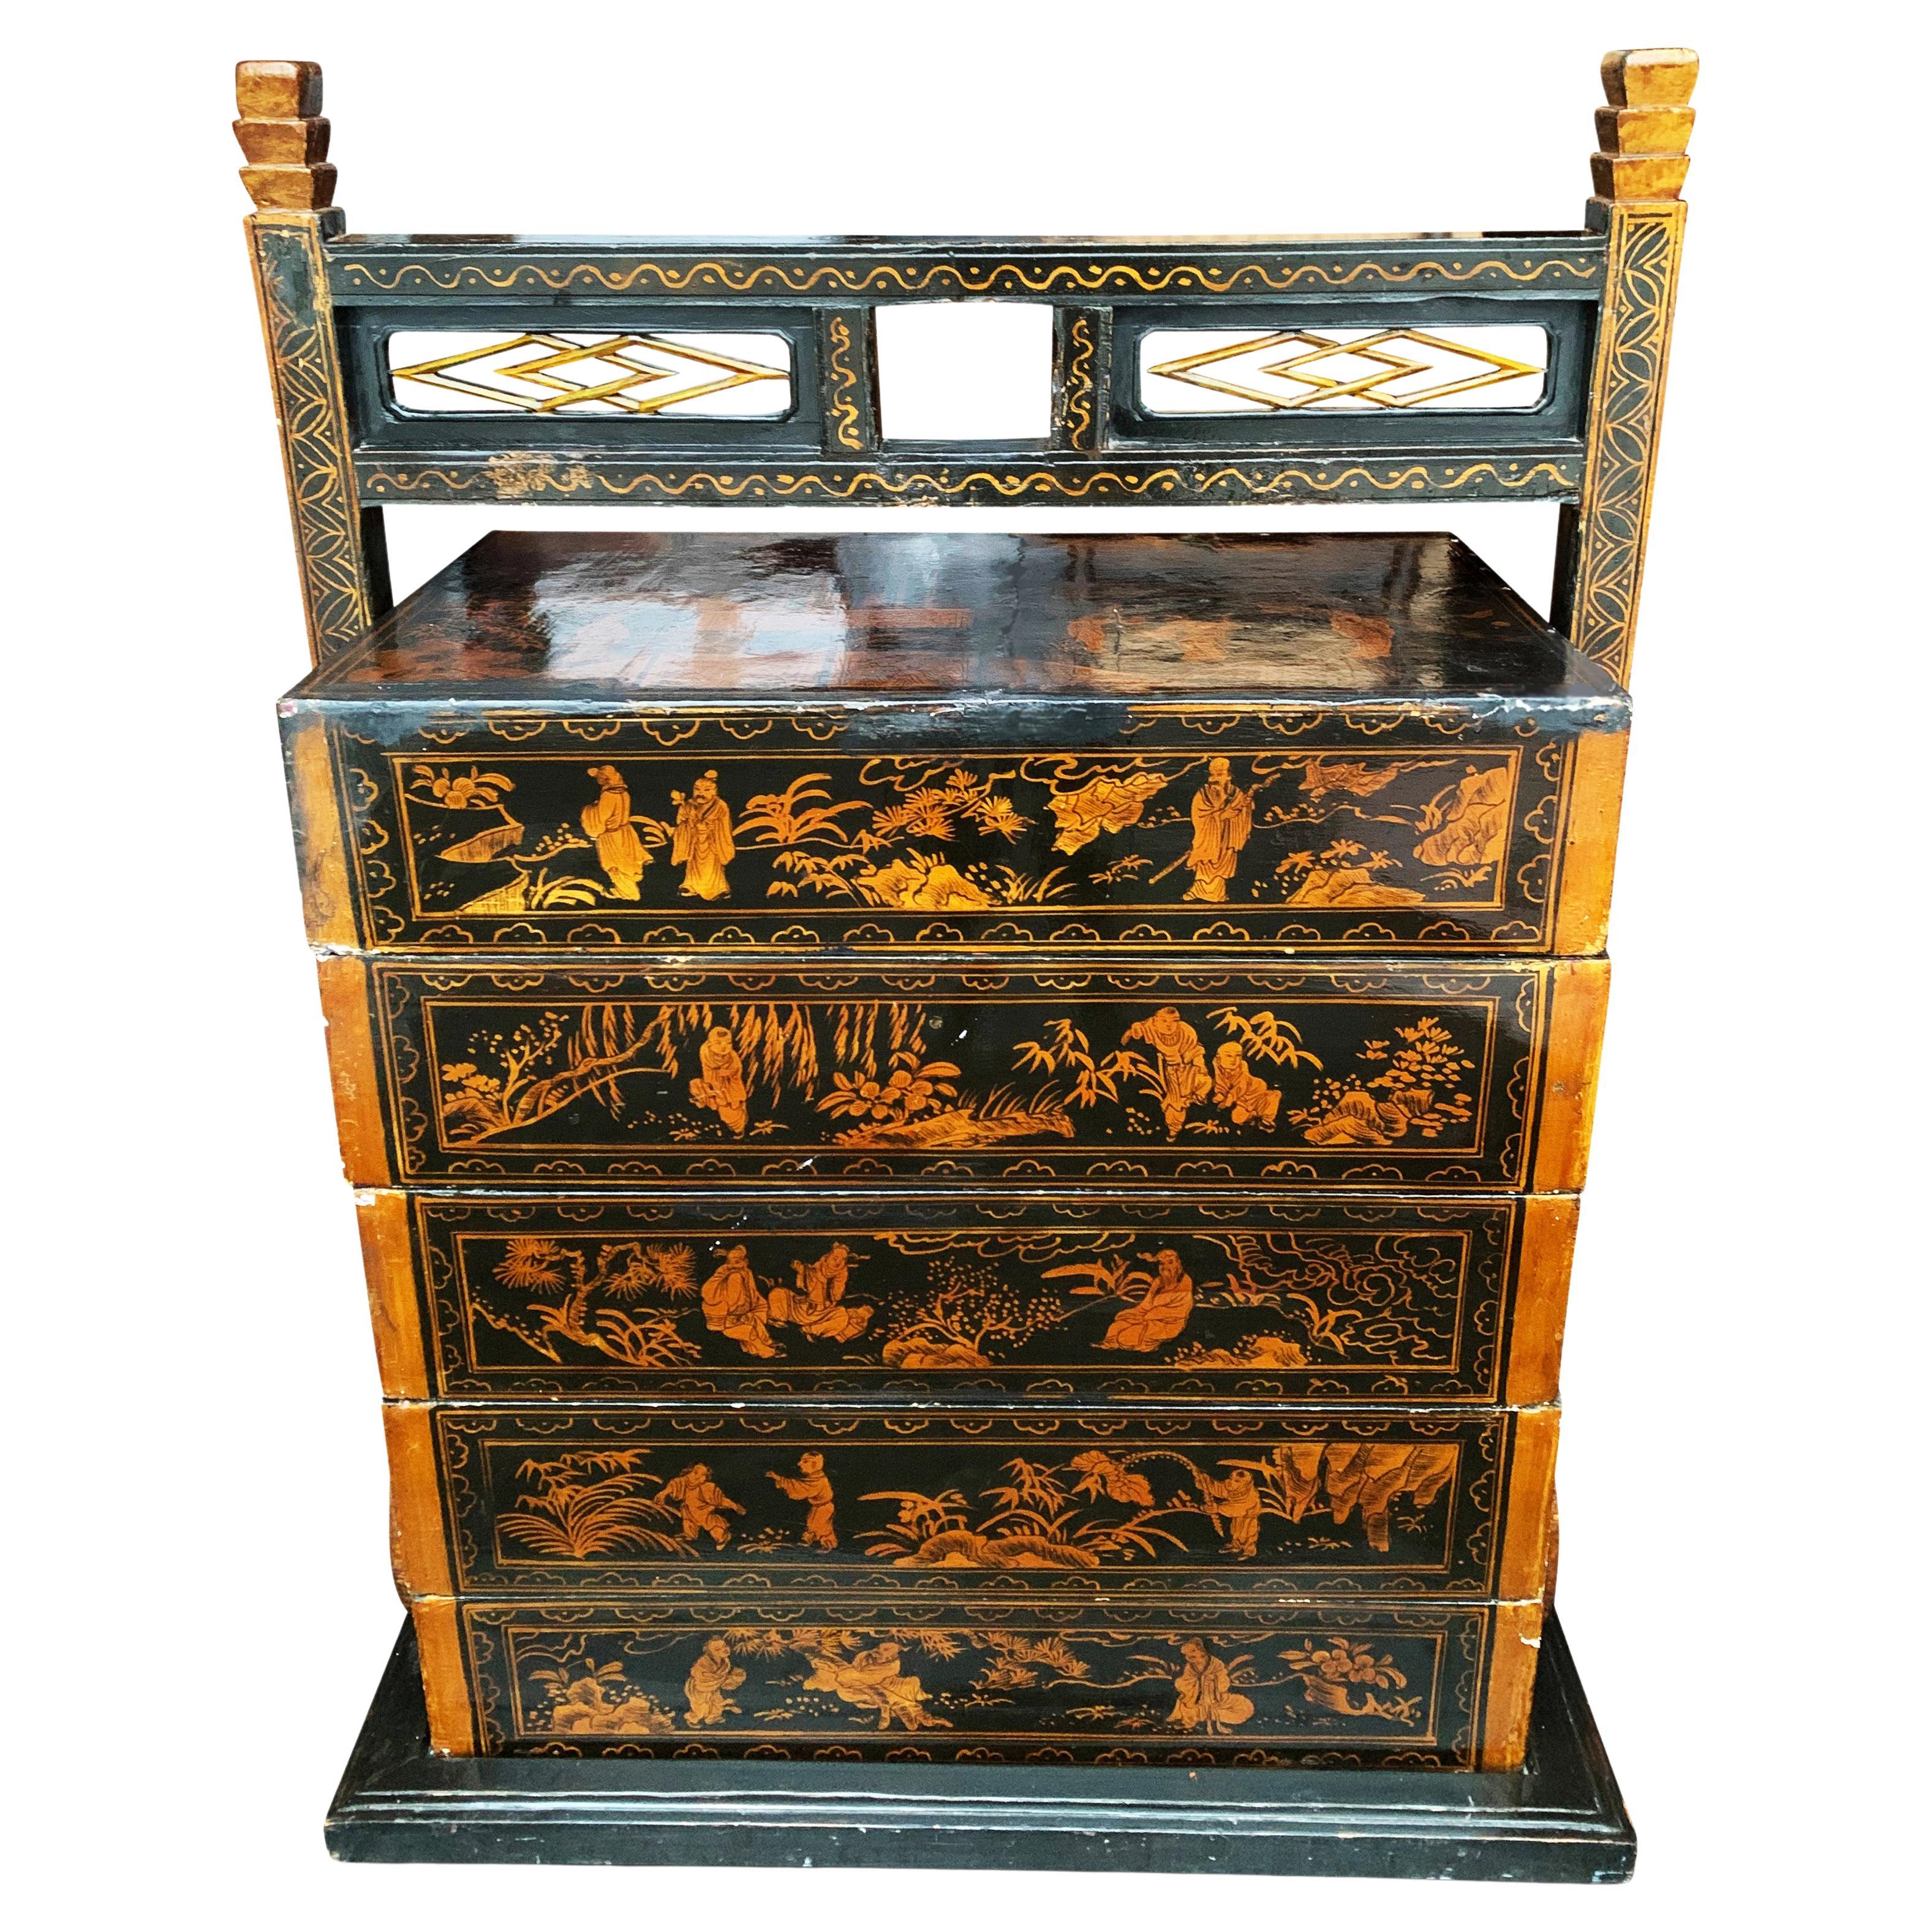 19th century Chinese black lacquered five section stacking chest with exquisite figural decorative scenes.




